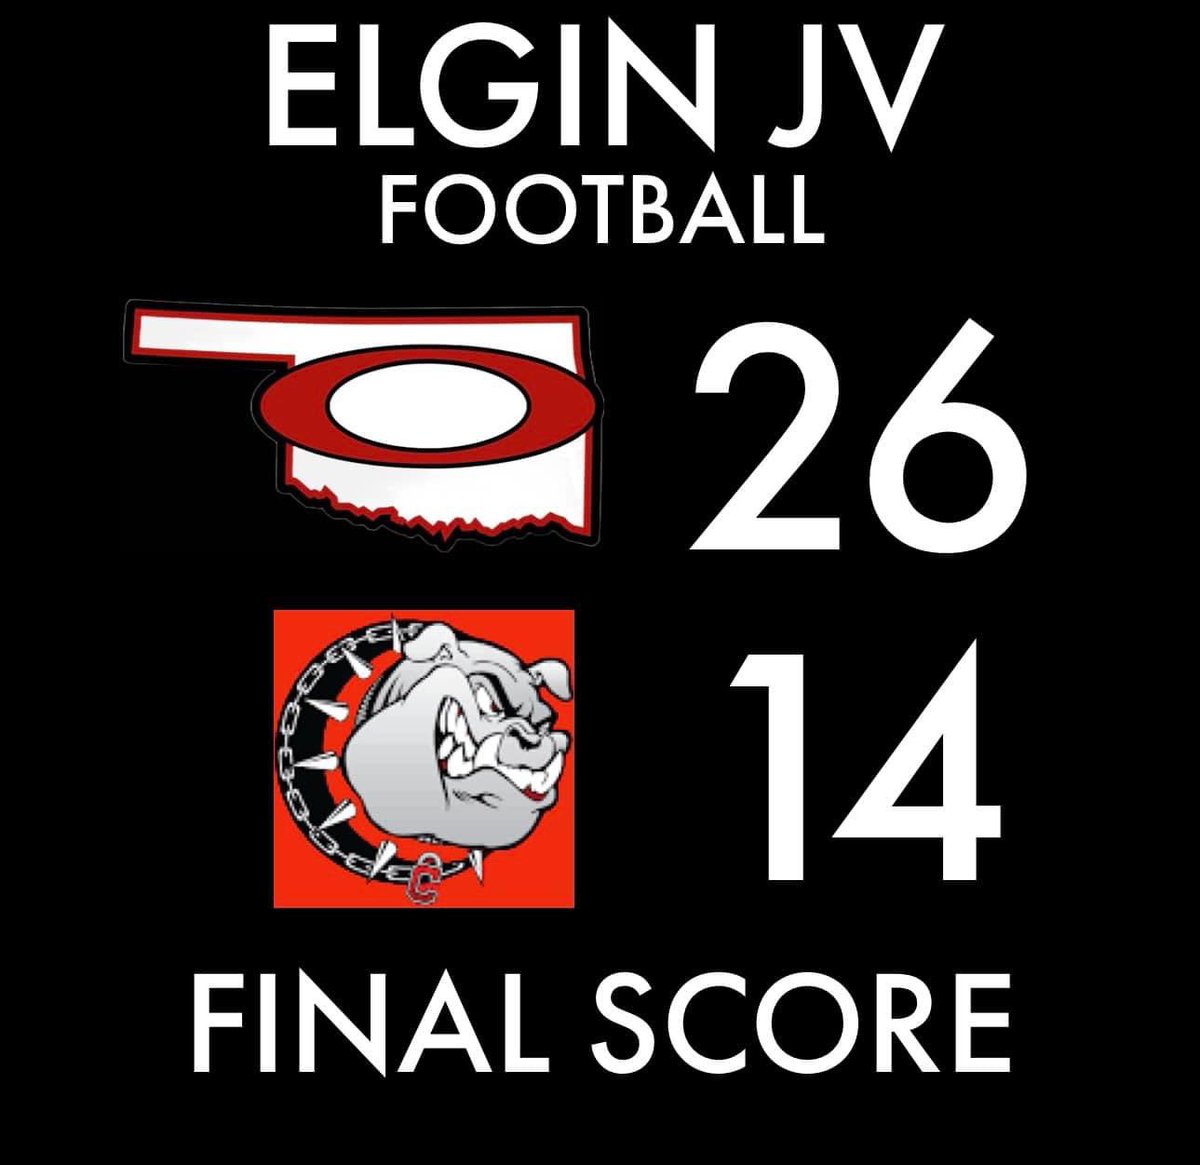 9th and JV finished the year with a combined 10-1 record! 

Future will stay bright in Elgin. 
#SharpenYourAxe